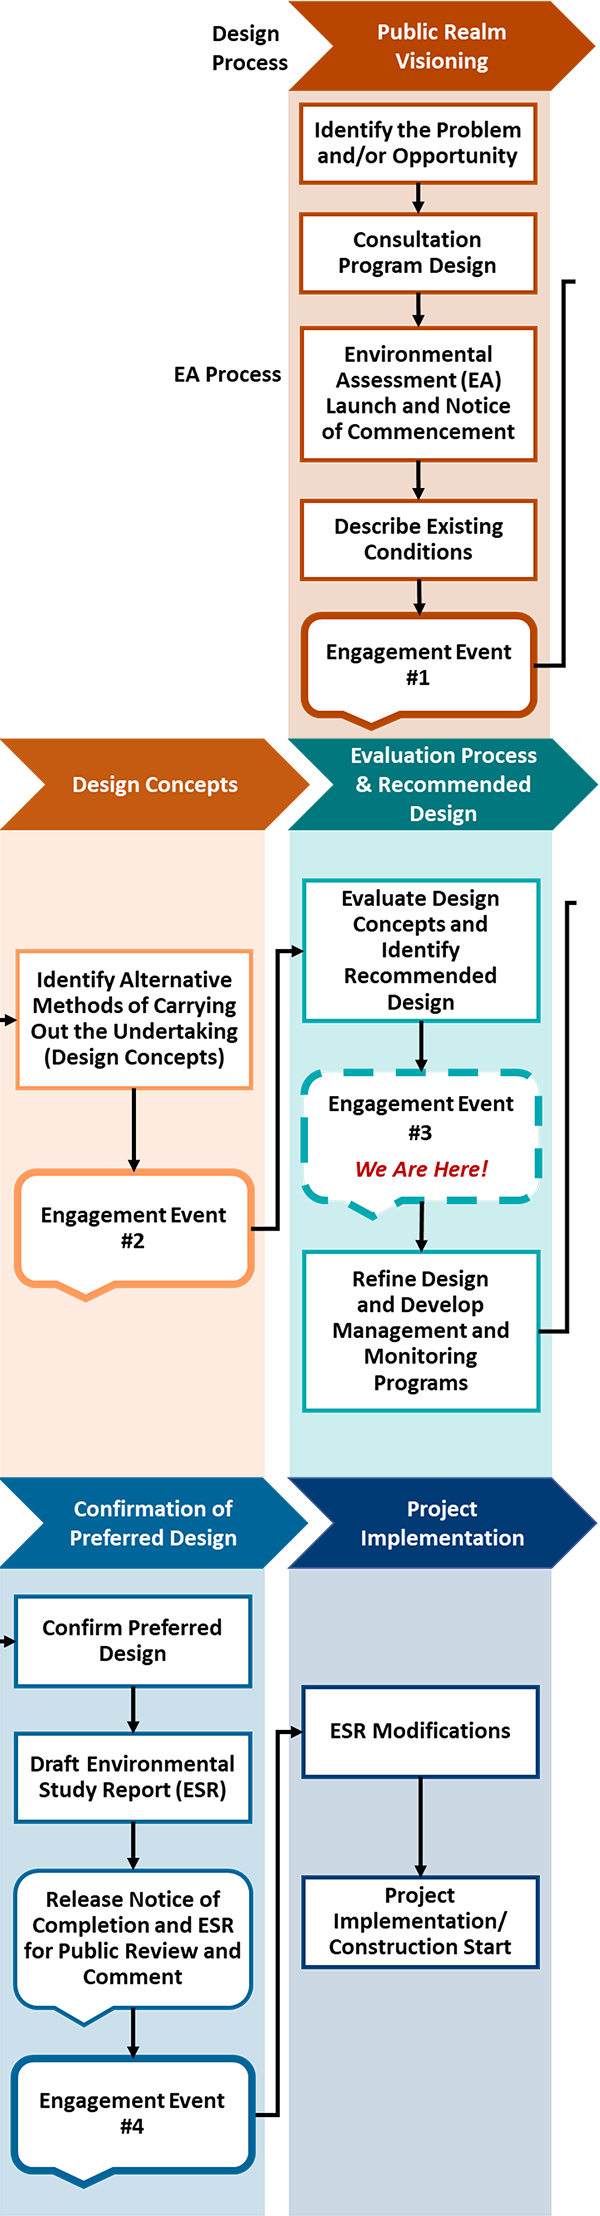 Design process and EA process chart showing the design process at the top with five stages left to right: public realm visioning; conceptual design options; evaluation process and recommended design; confirmation of preferred design; and project implementation. Below shows the EA process steps as they coincide with the design process stages. 